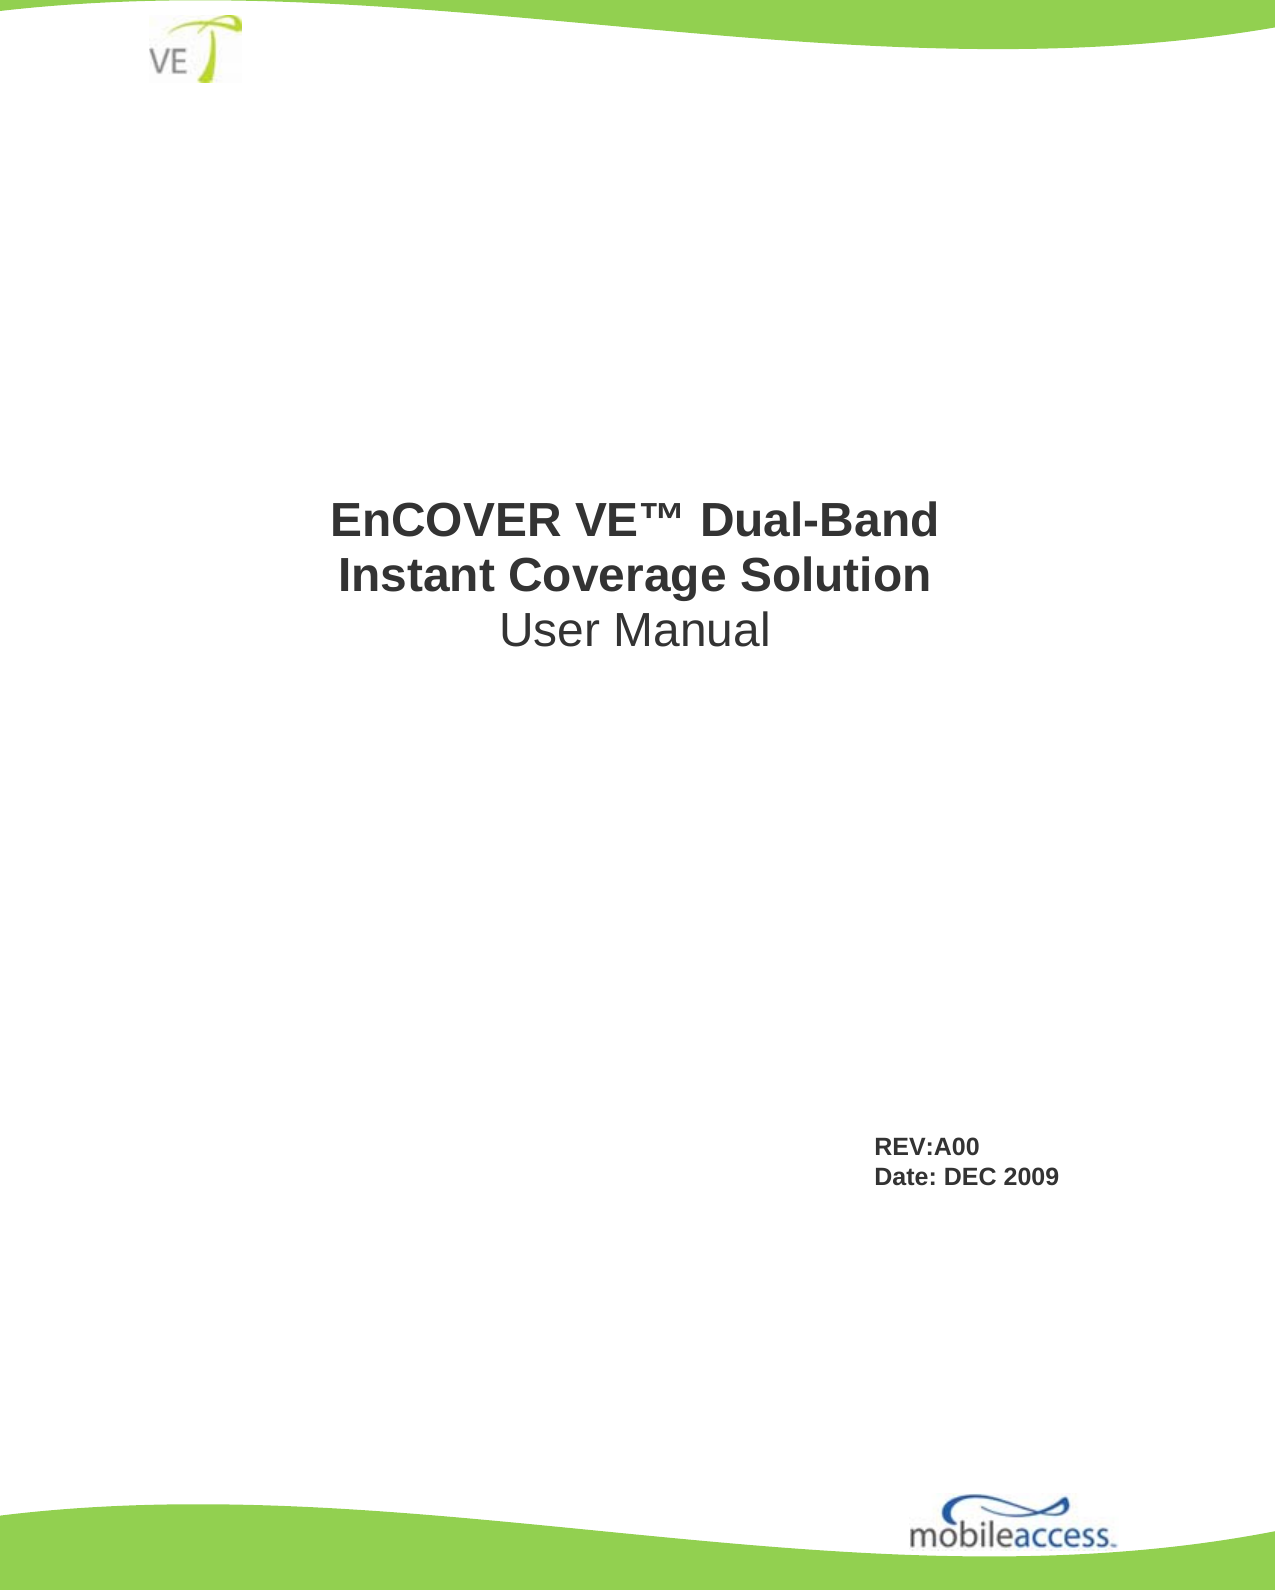                        EnCOVER VE™ Dual-Band Instant Coverage Solution User Manual REV:A00 Date: DEC 2009 